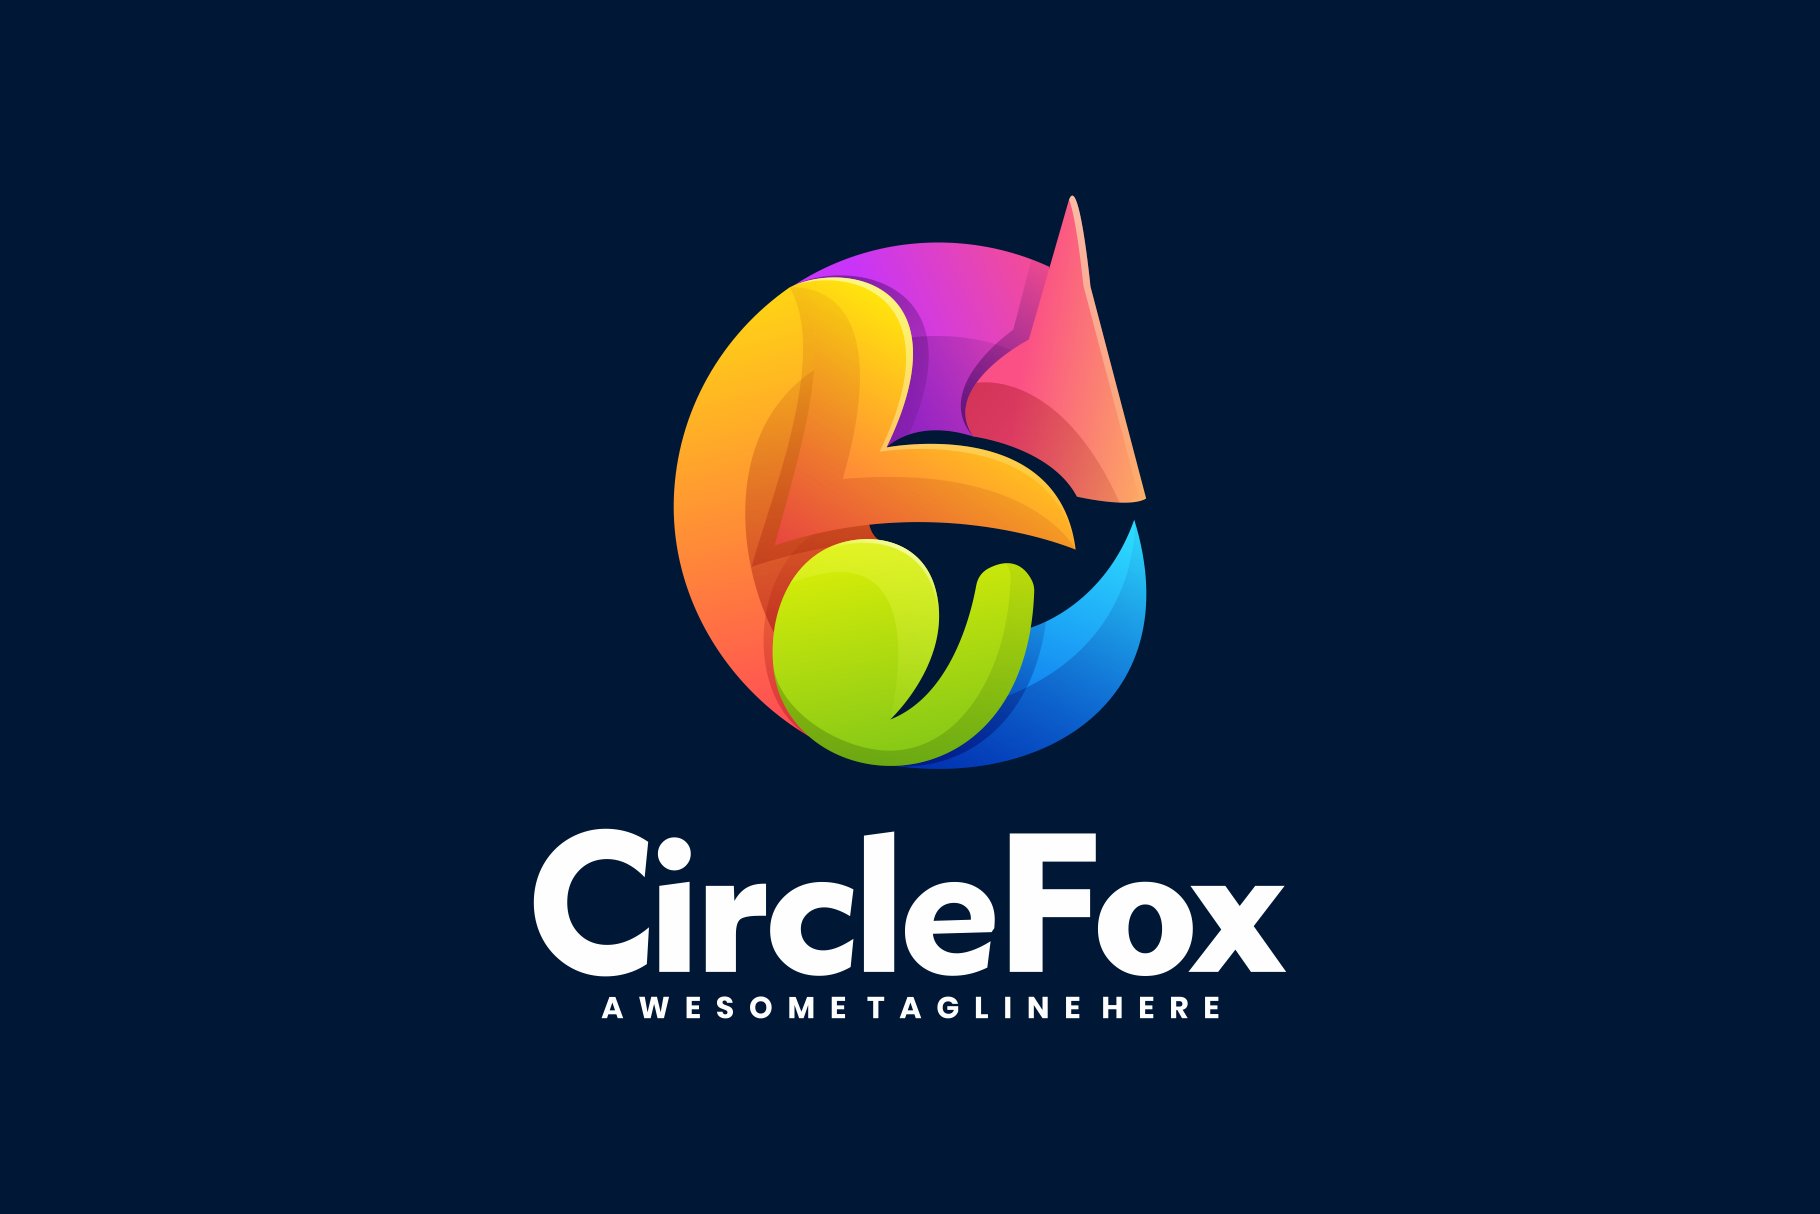 Circle Fox Gradient Colorful Style cover image.